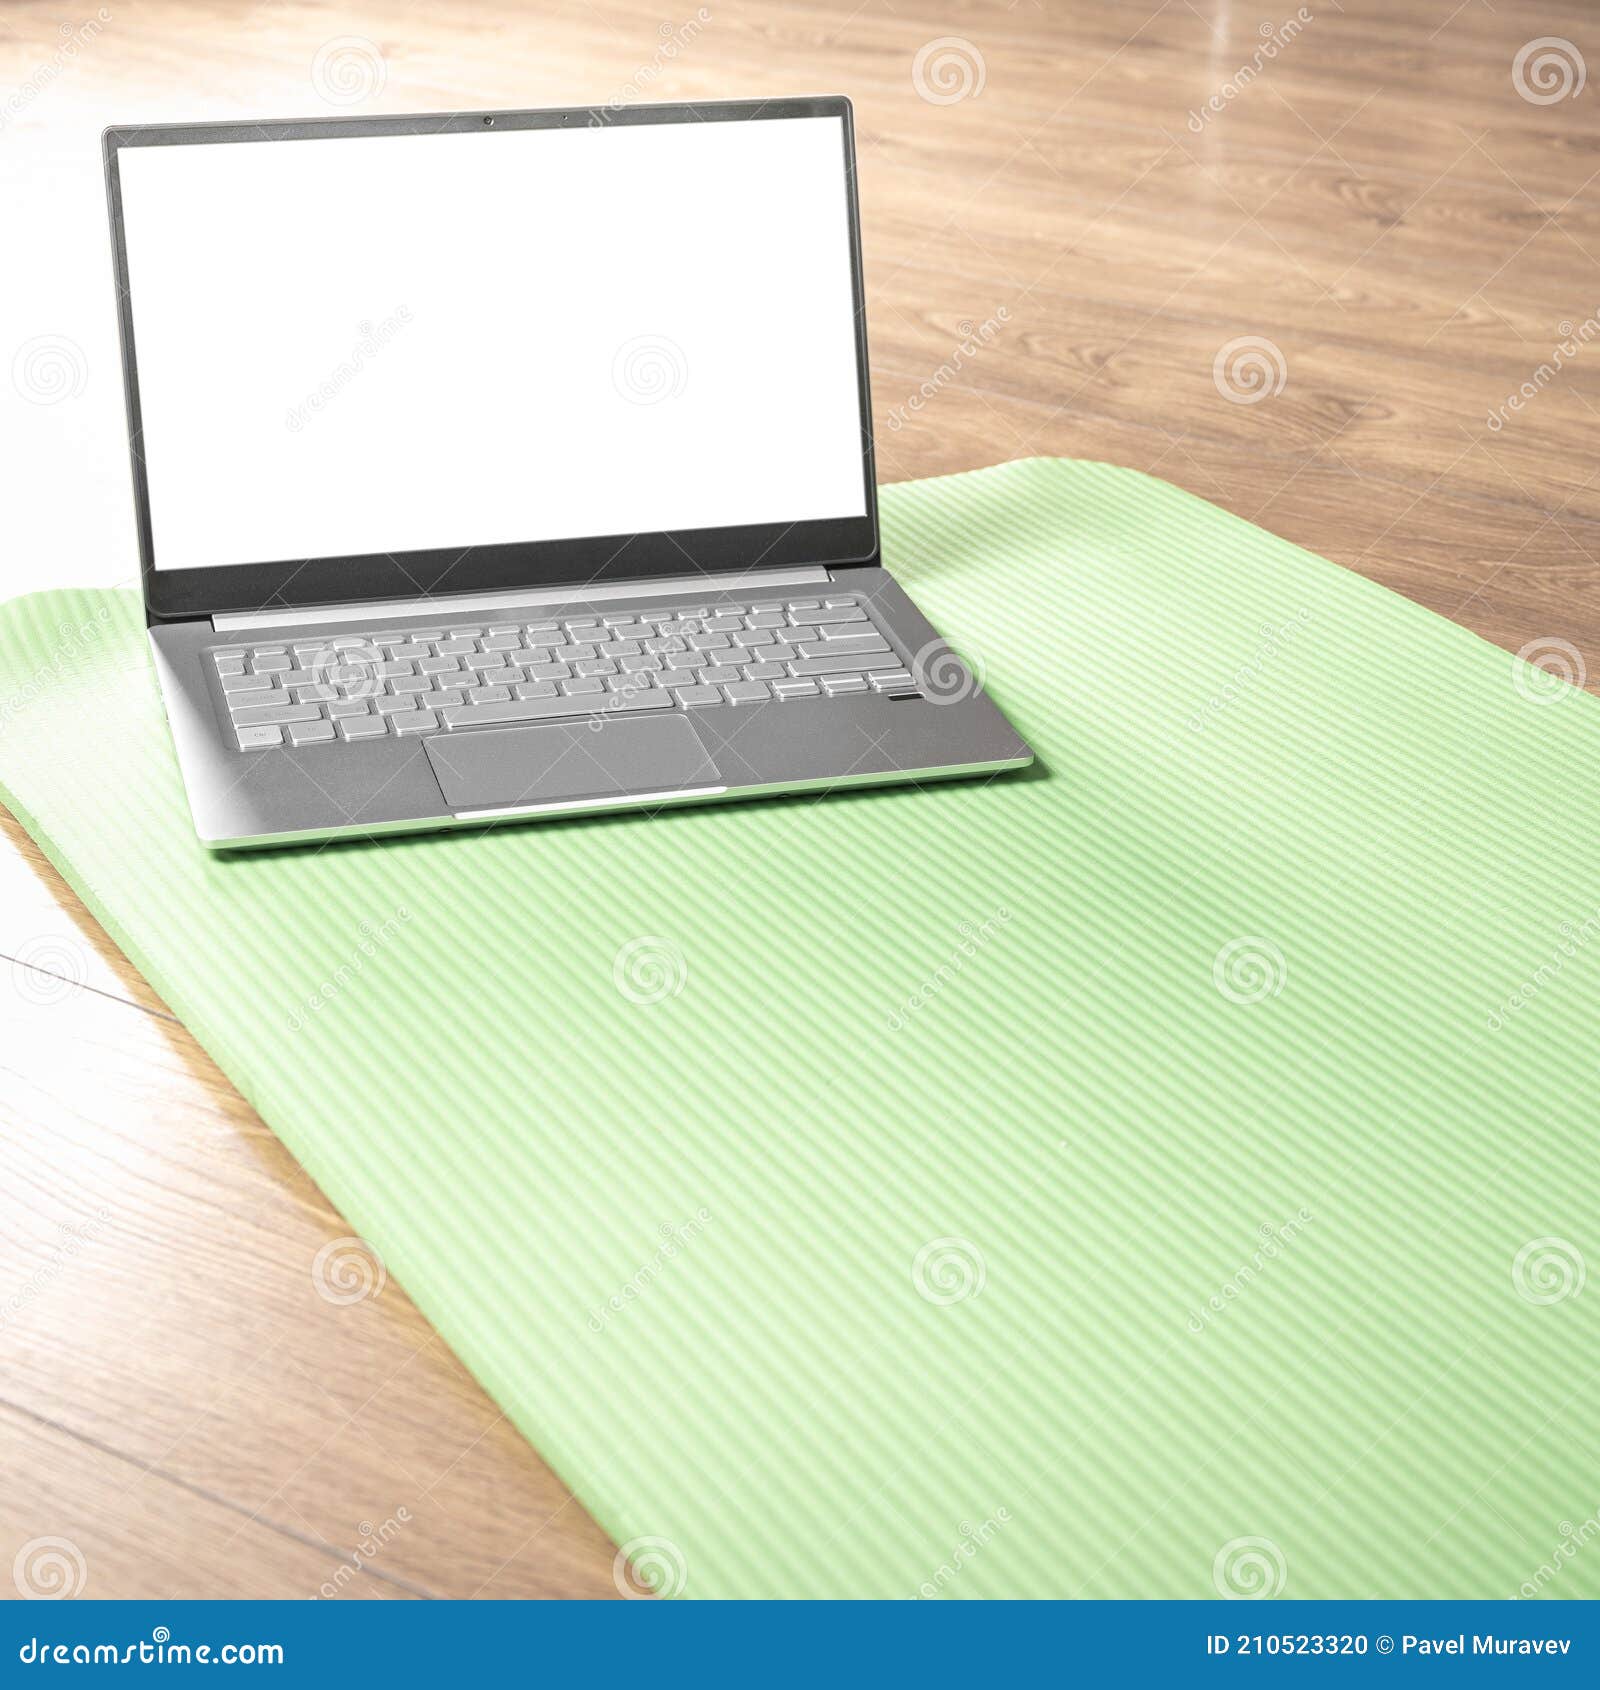 Download 346 Mat Mockup Yoga Photos Free Royalty Free Stock Photos From Dreamstime